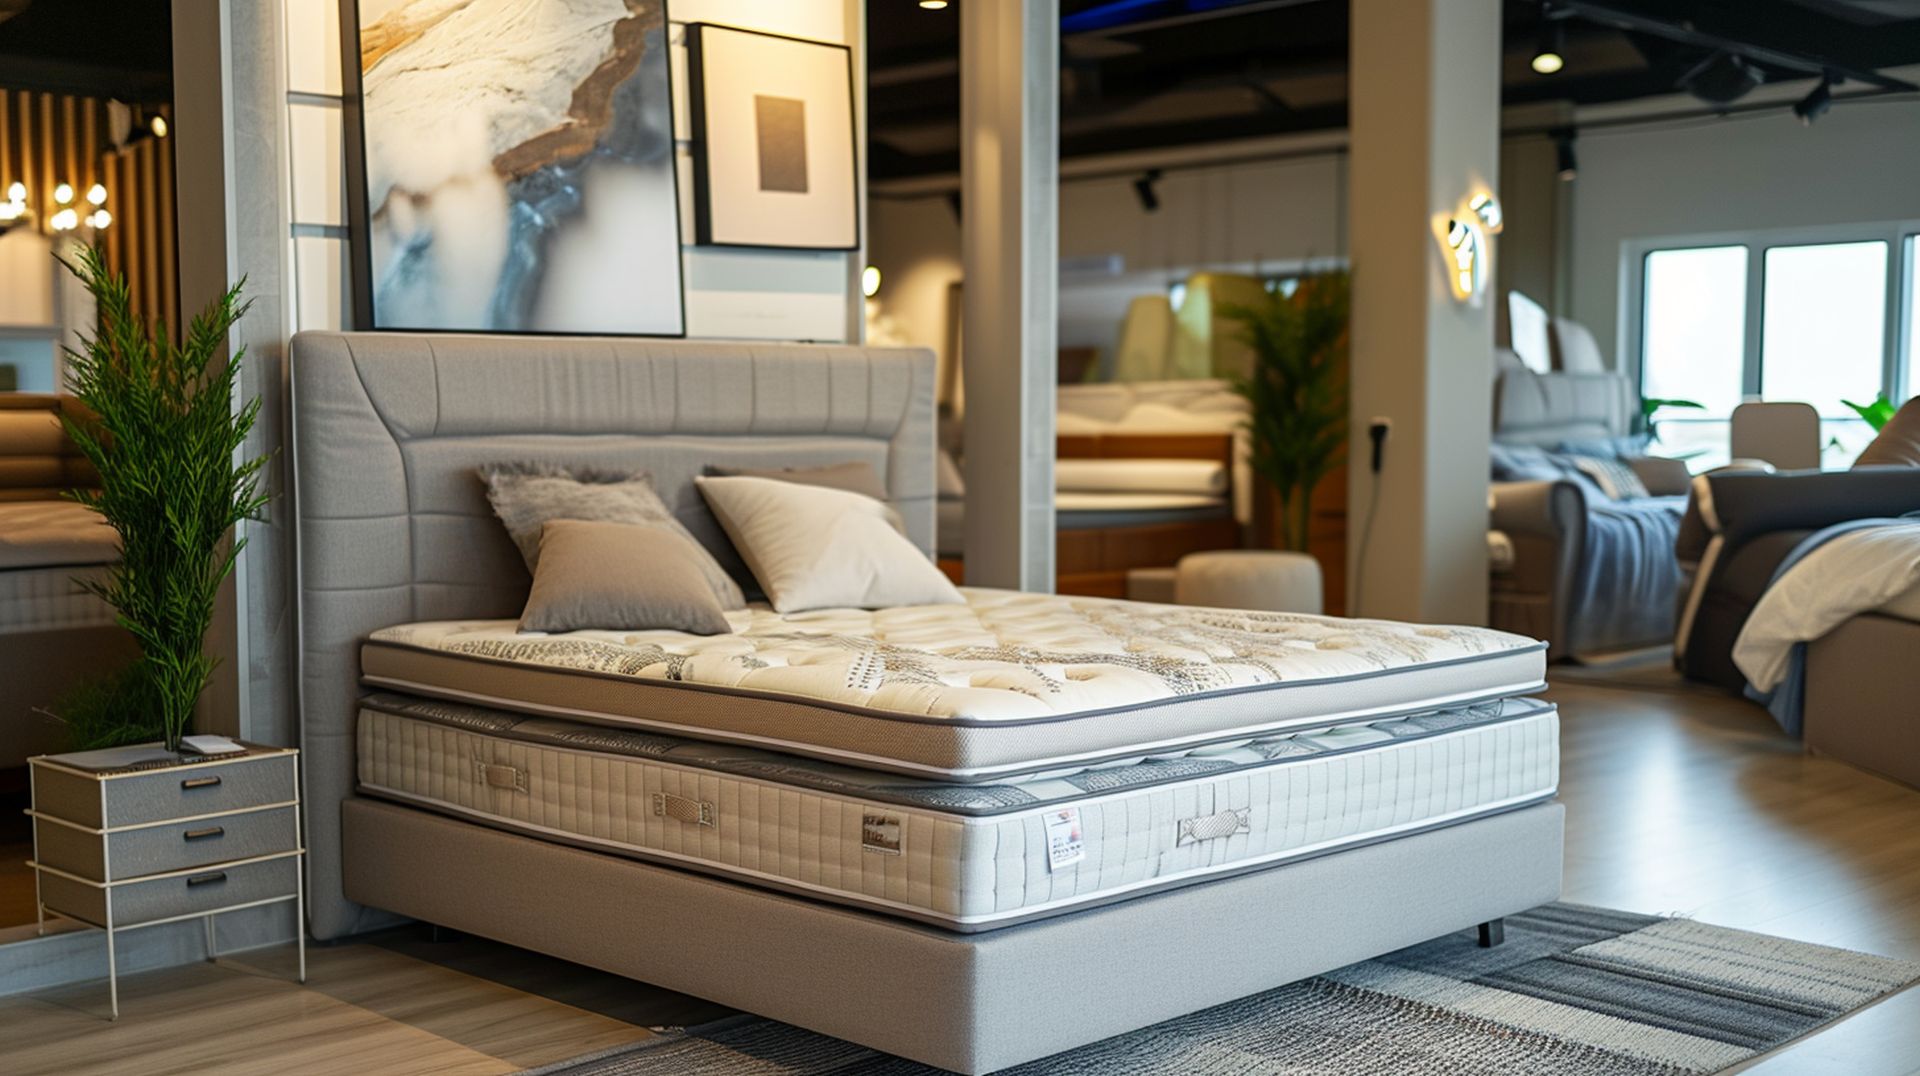 If you're looking for a new bed, mattress stores in Battle Creek offer the best customer and delivery service, financing, and warranties in Michigan